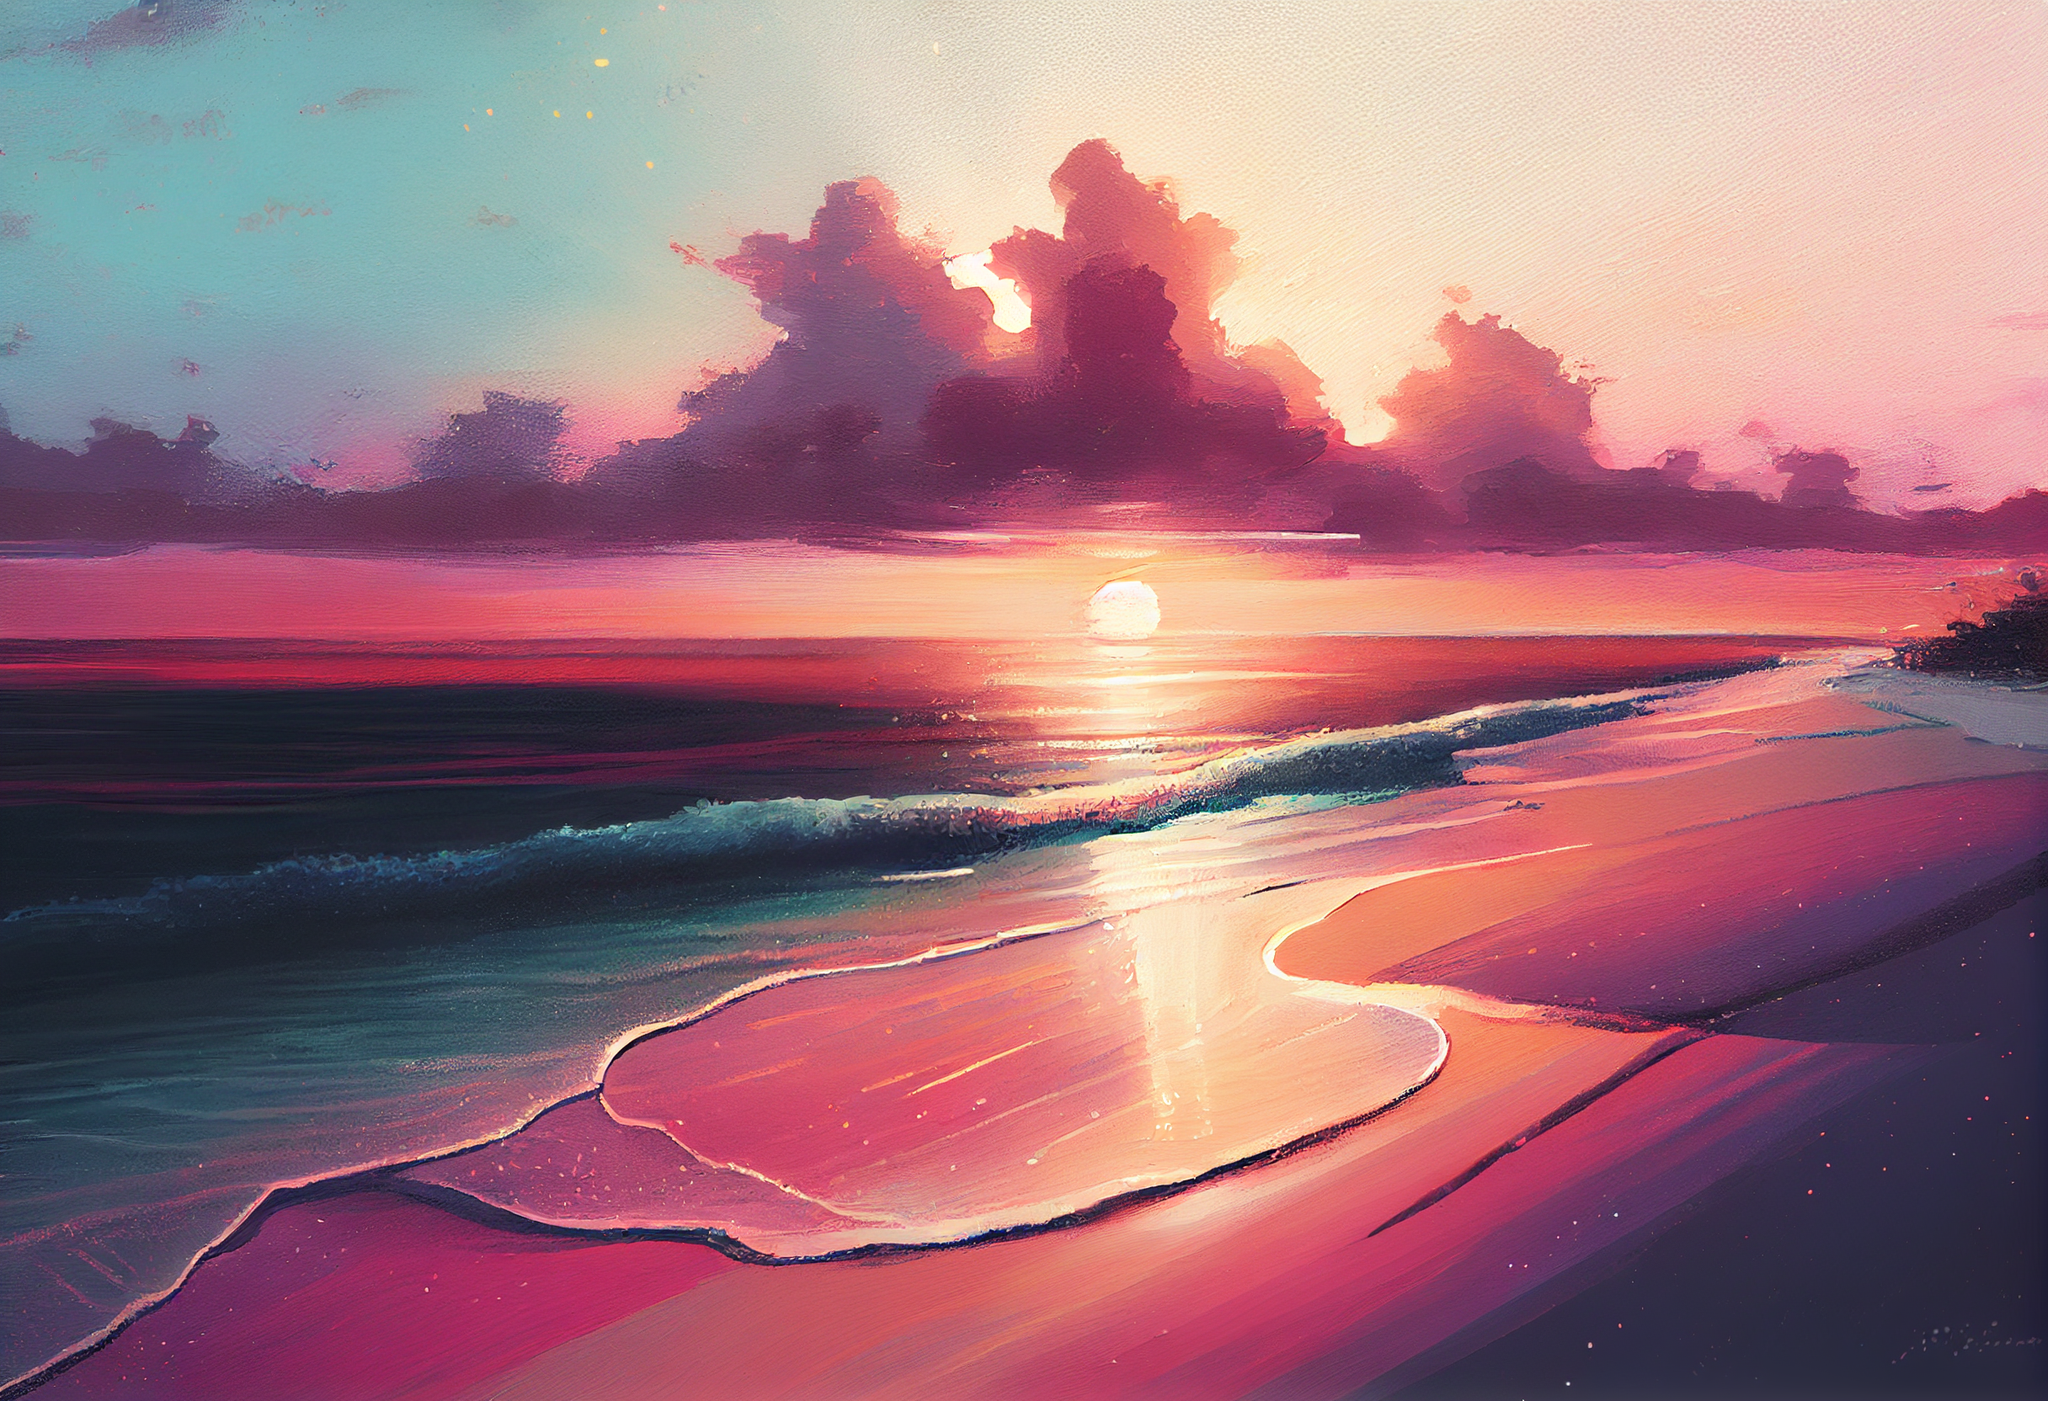 Tranquil Shores: An Oil Color Print of a Calm Sea and White Sand, with Sunbeams Lighting up a Light Orange and Pink Sky